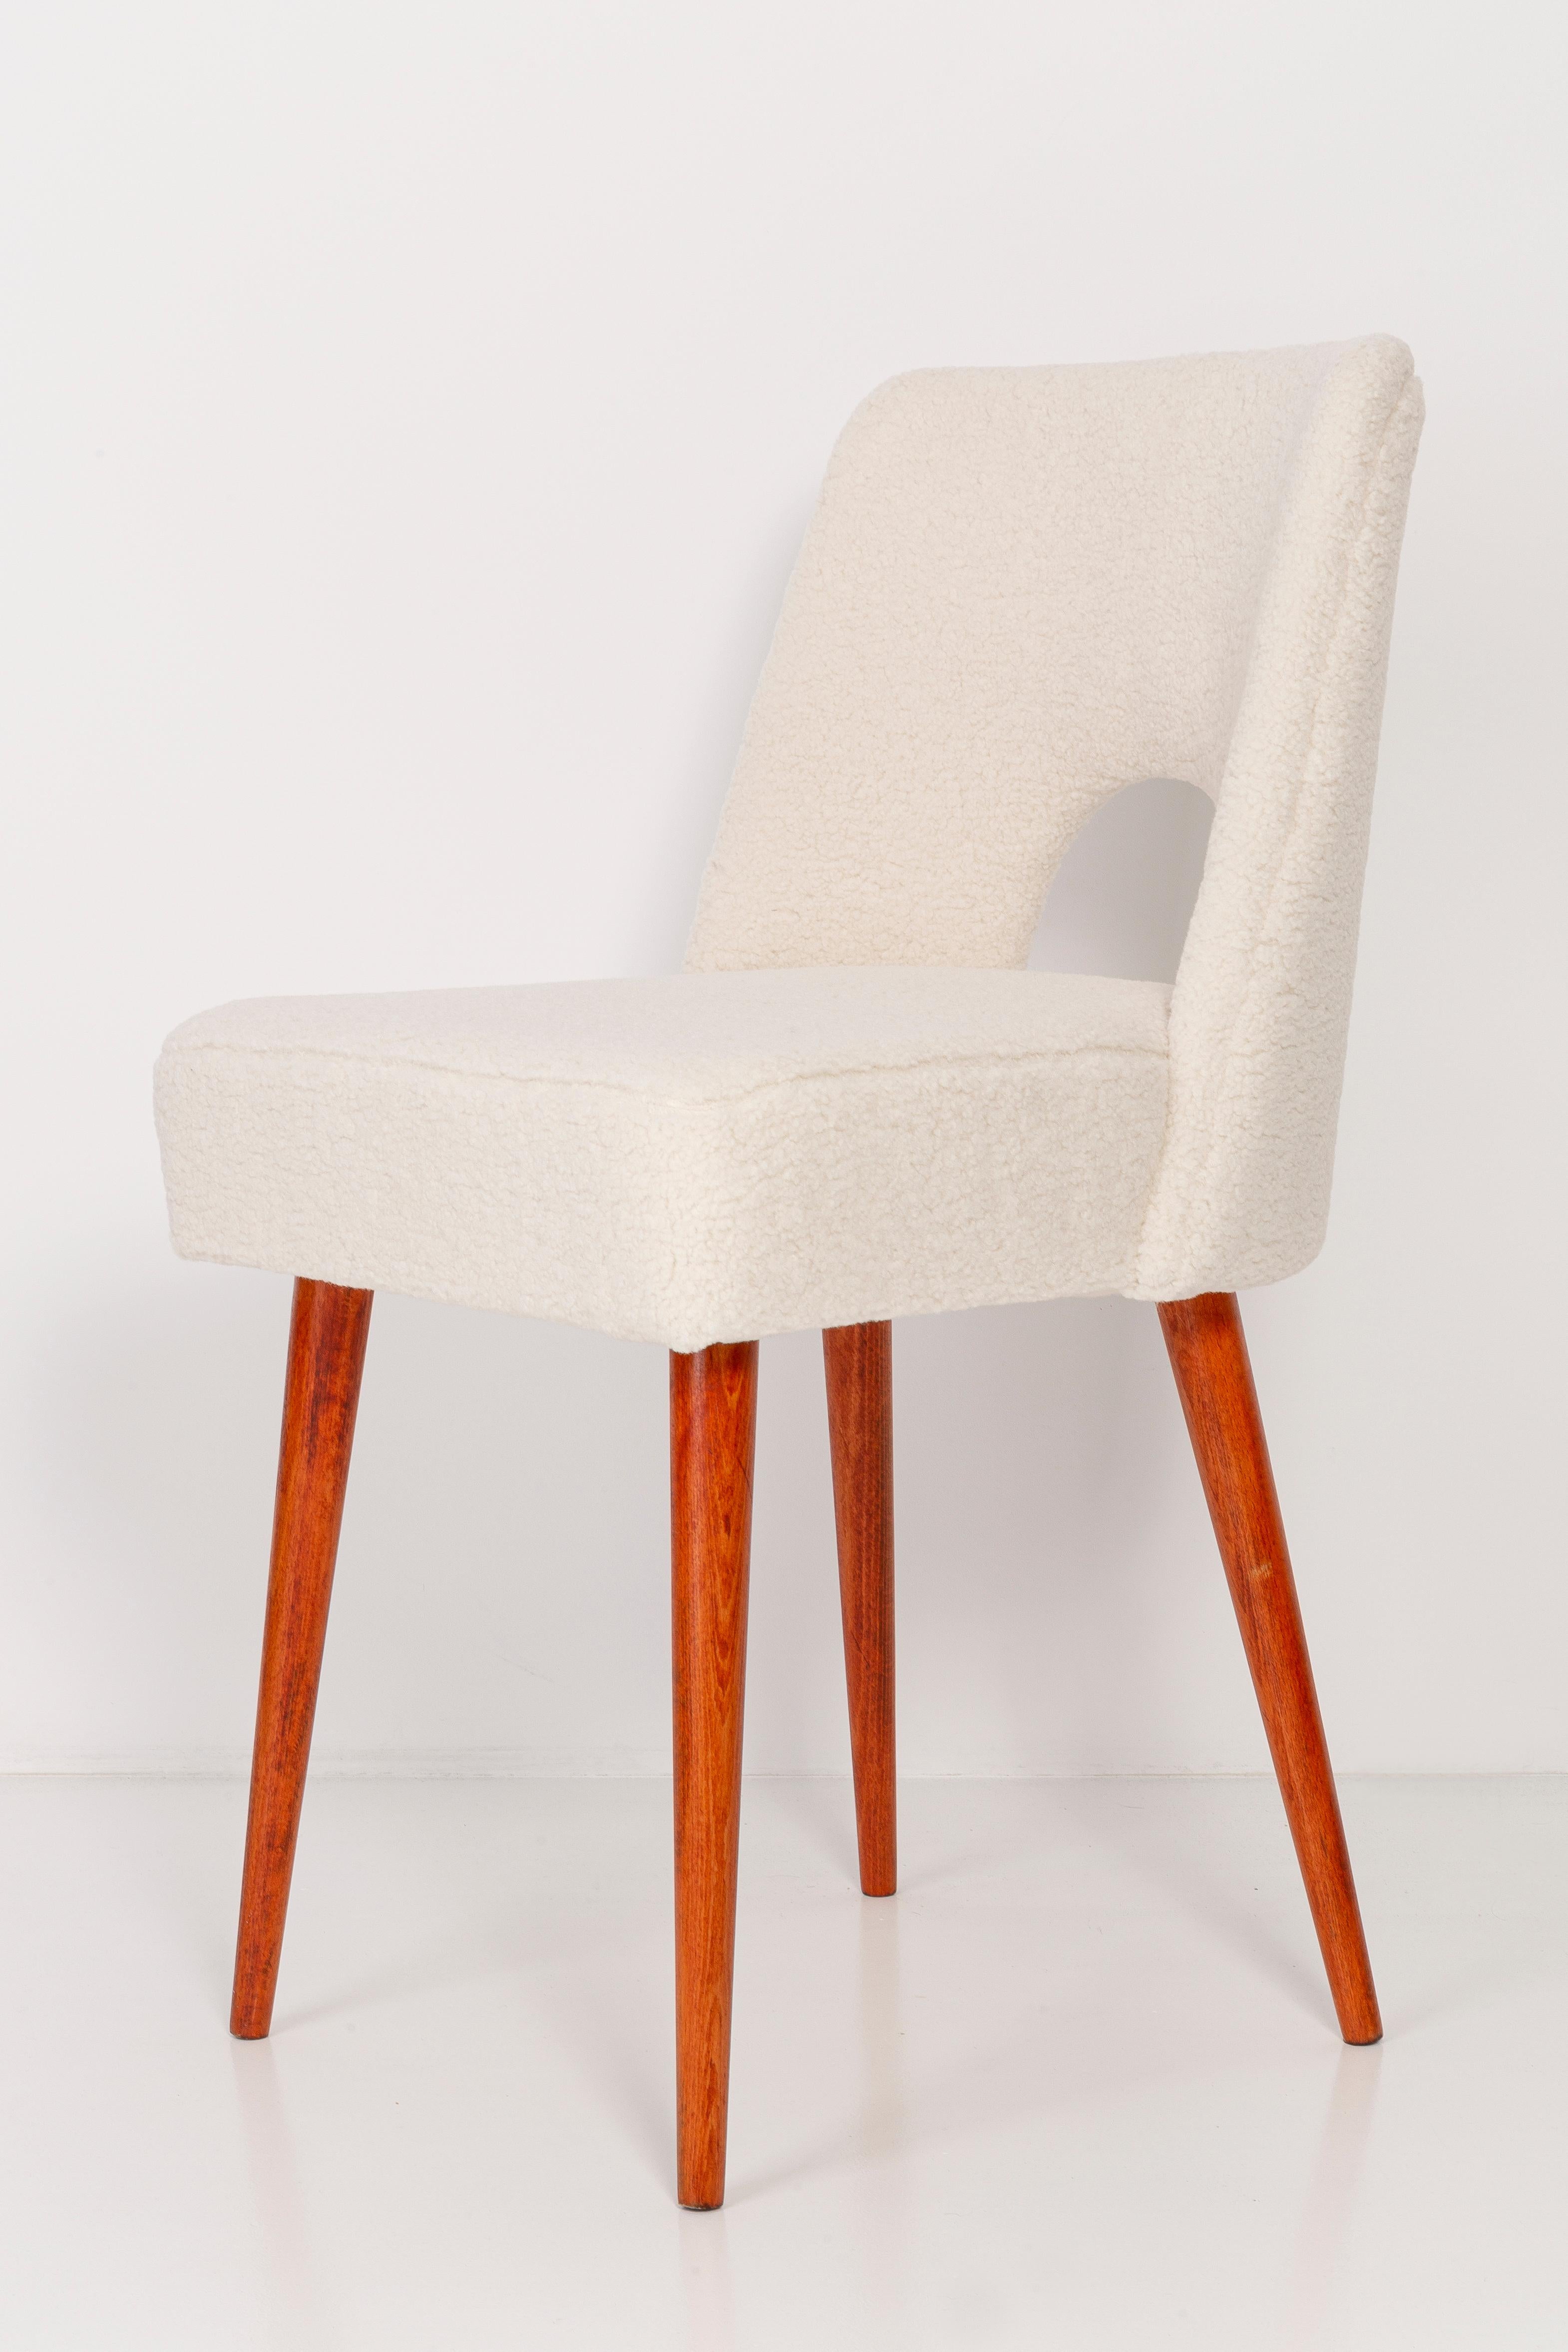 20th Century Set of Two Light Crème Boucle 'Shell' Chairs, 1960s For Sale